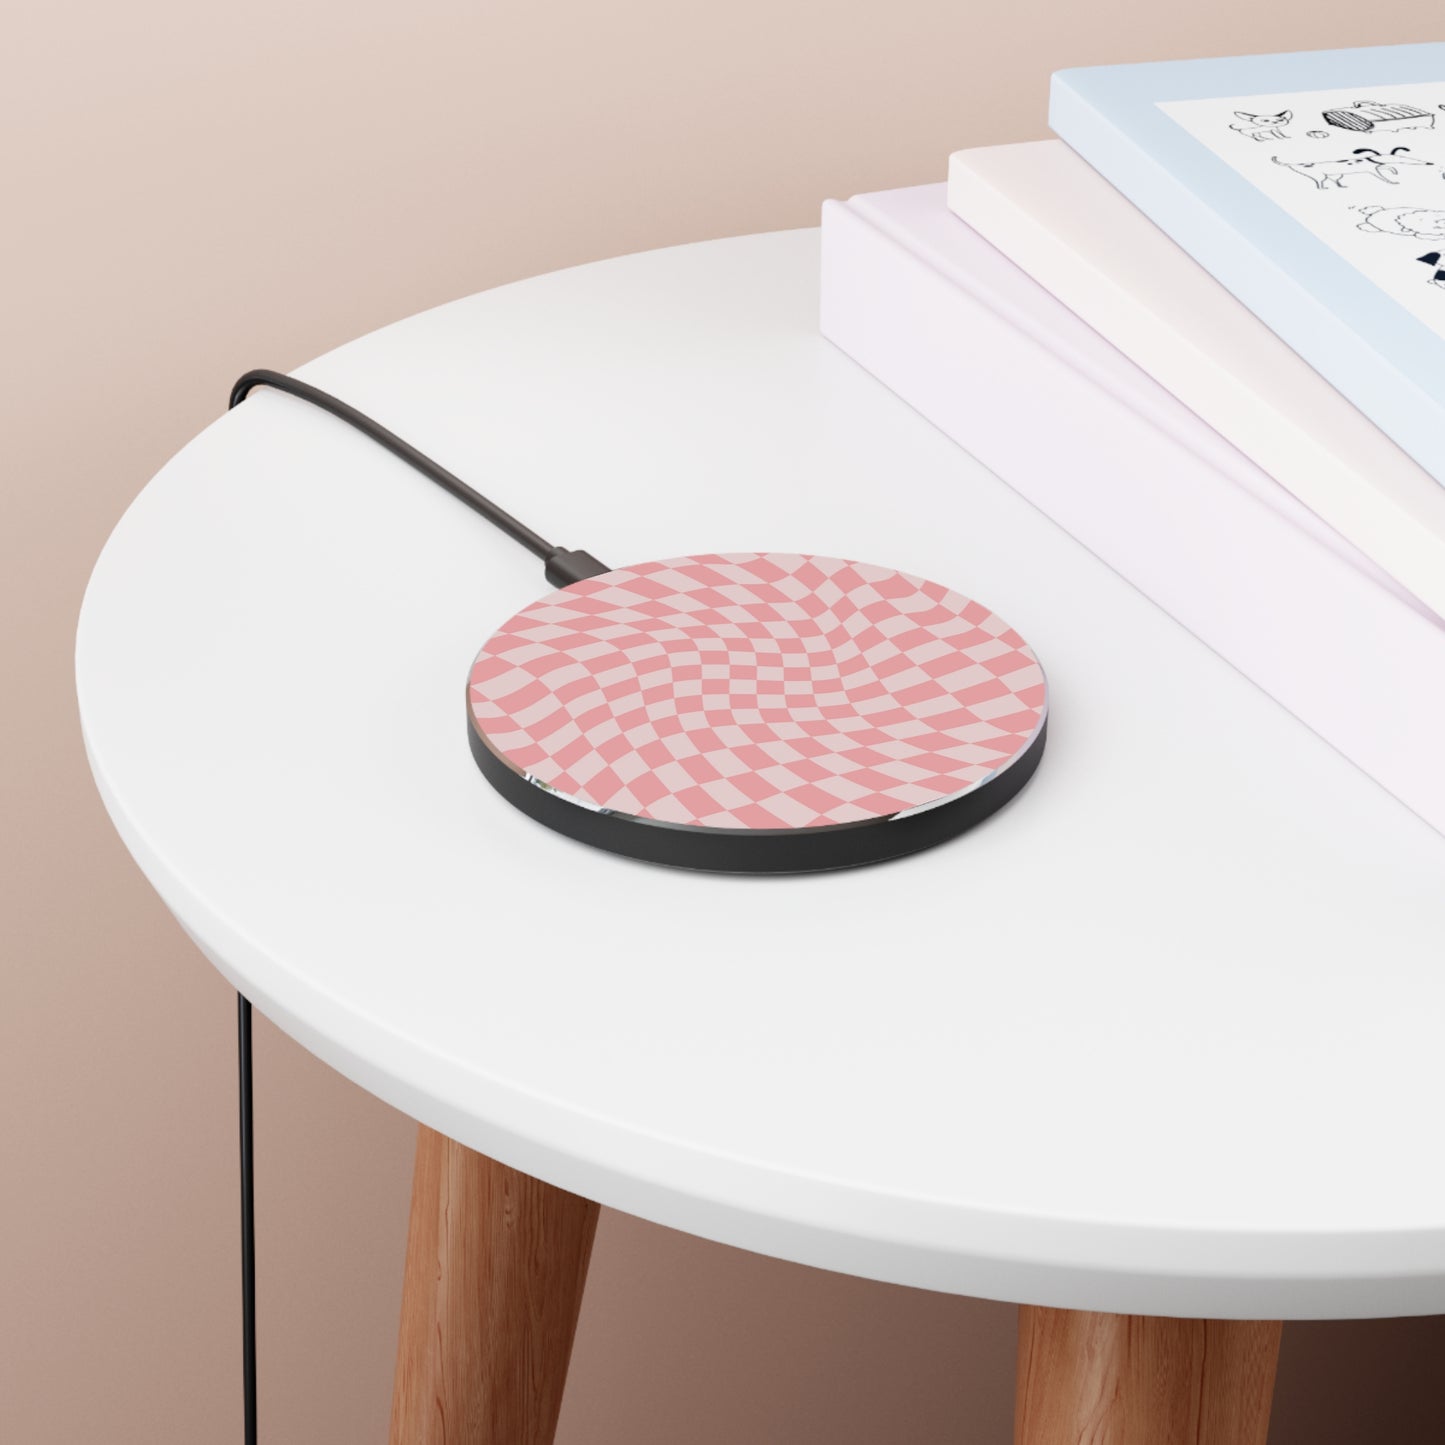 Wavy Pink Checkerboard Wireless Charger